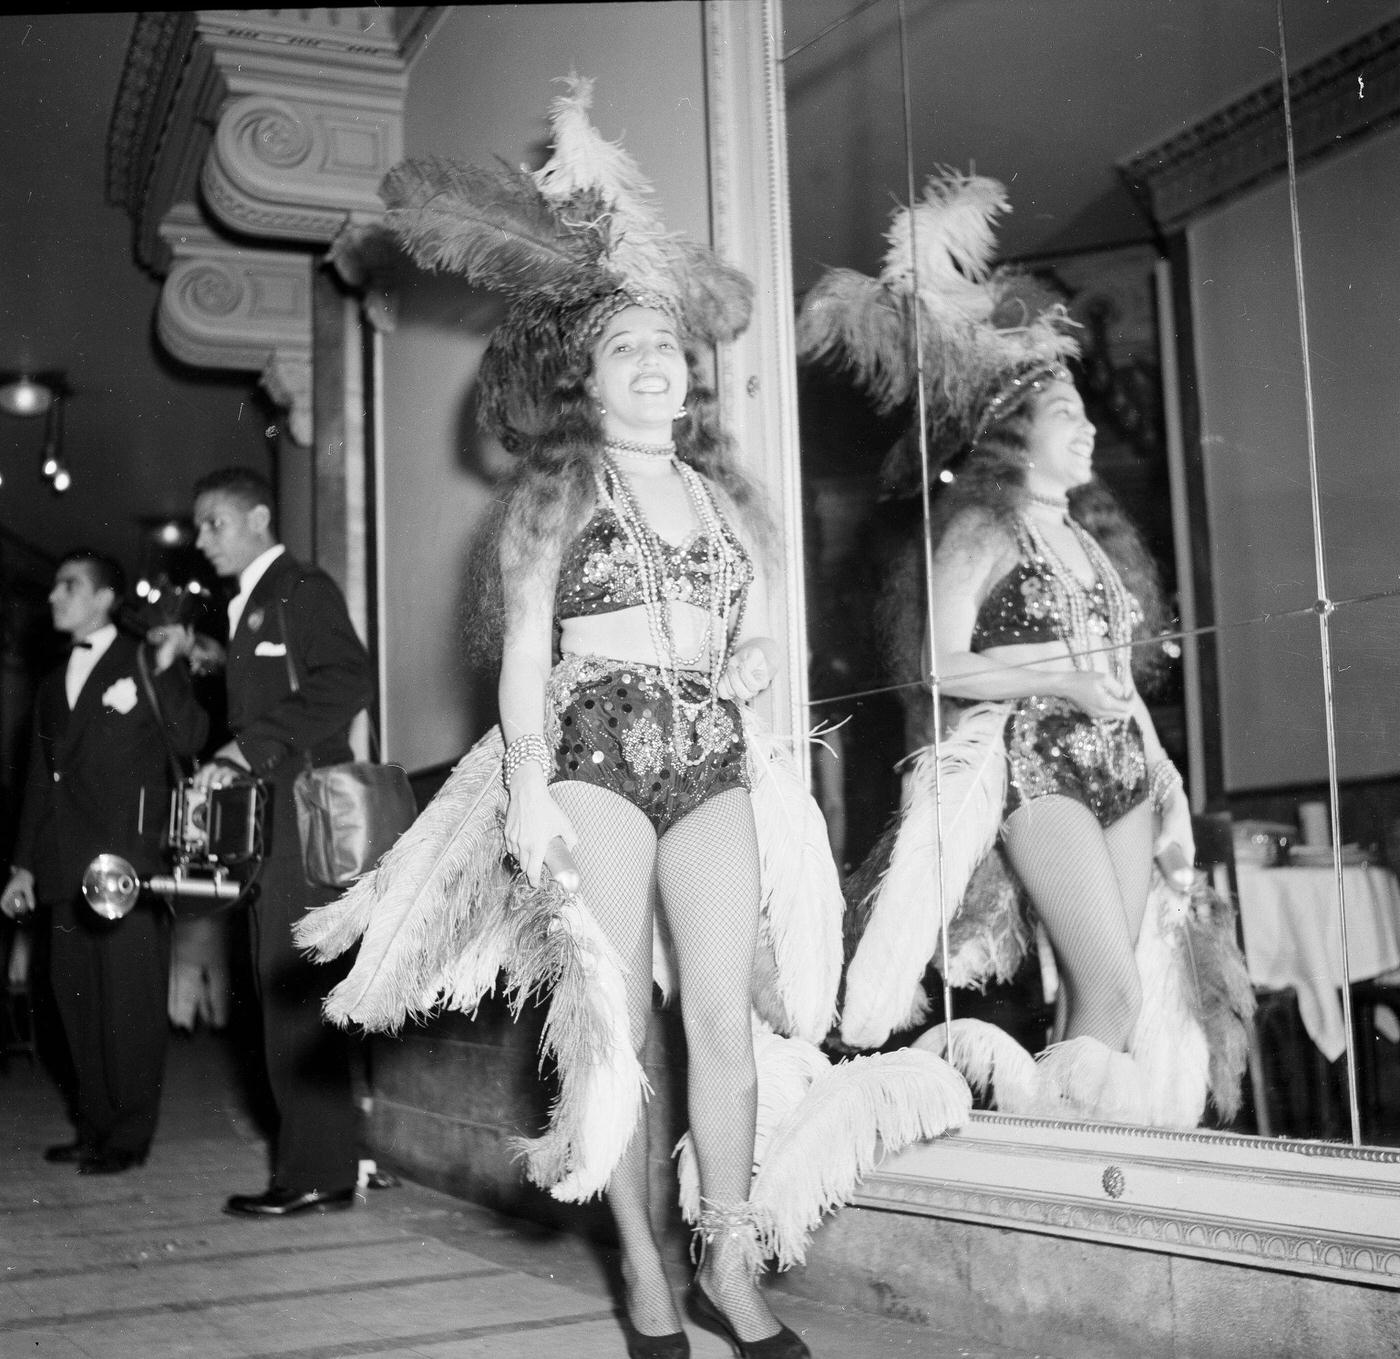 Woman in Costume Partying, Rio Carnival 1953